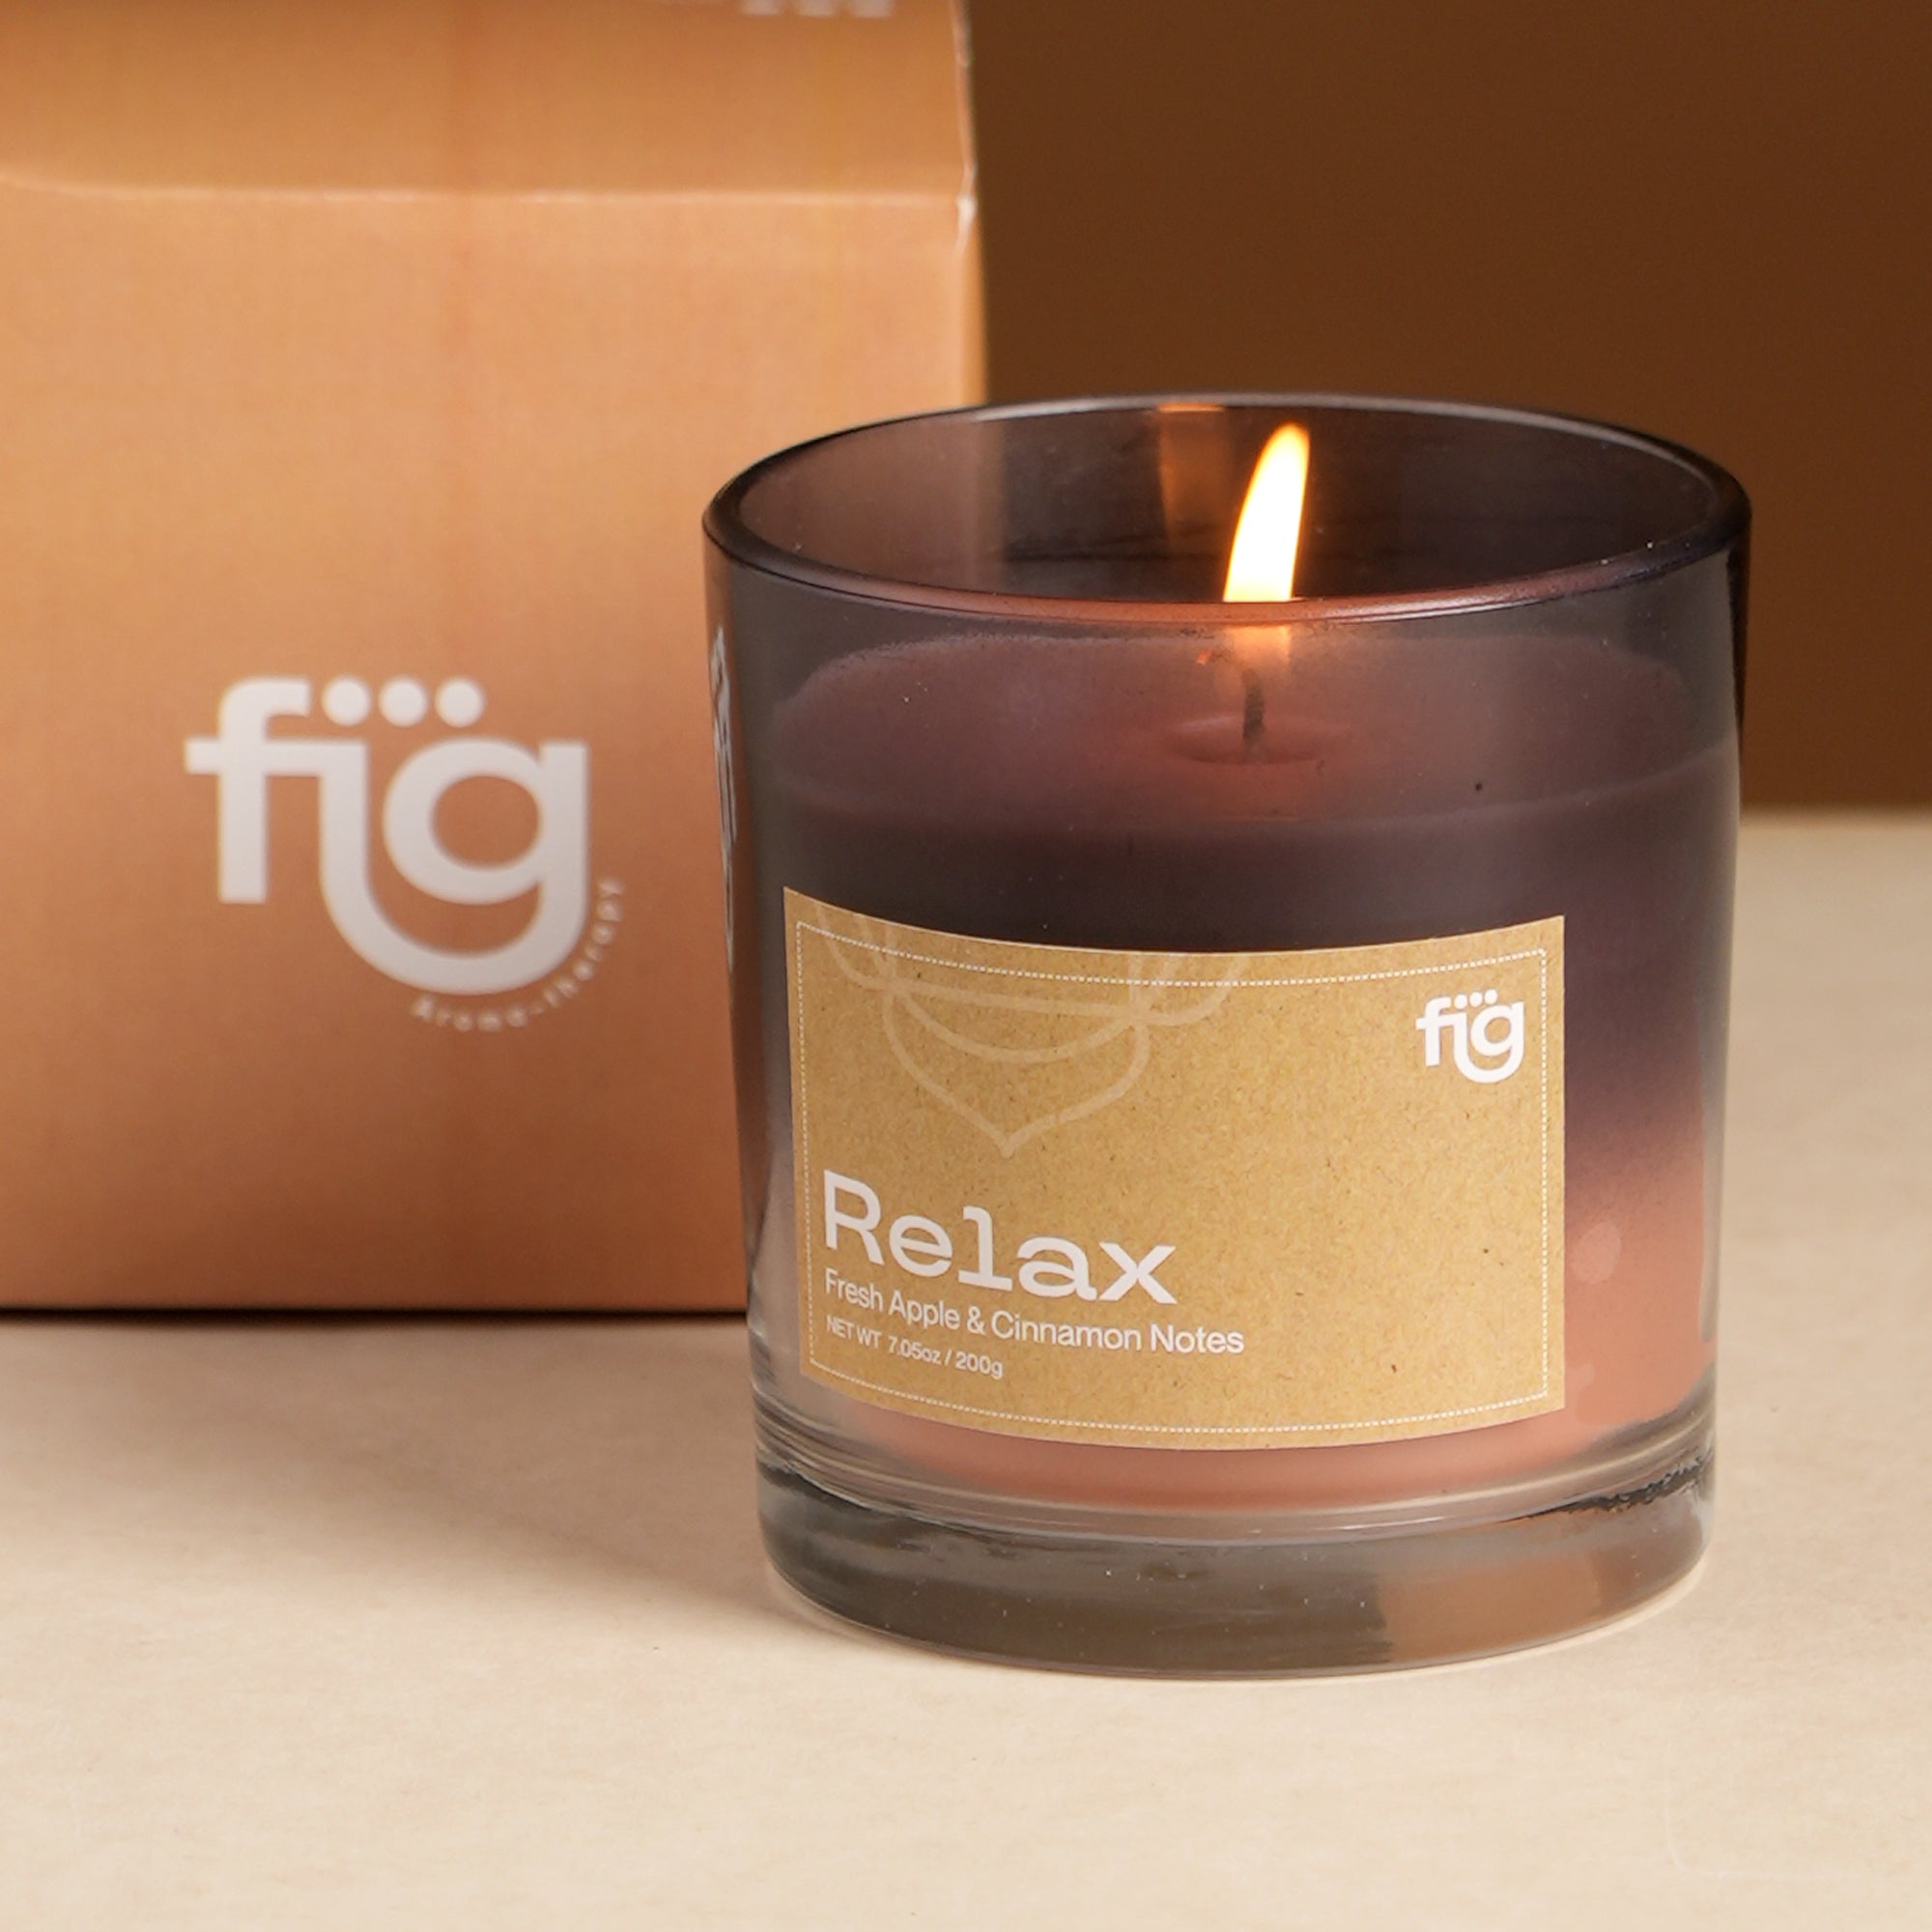 Relax Apple & Cinnamon Vegan Wax Candle - Palm Wax Scented